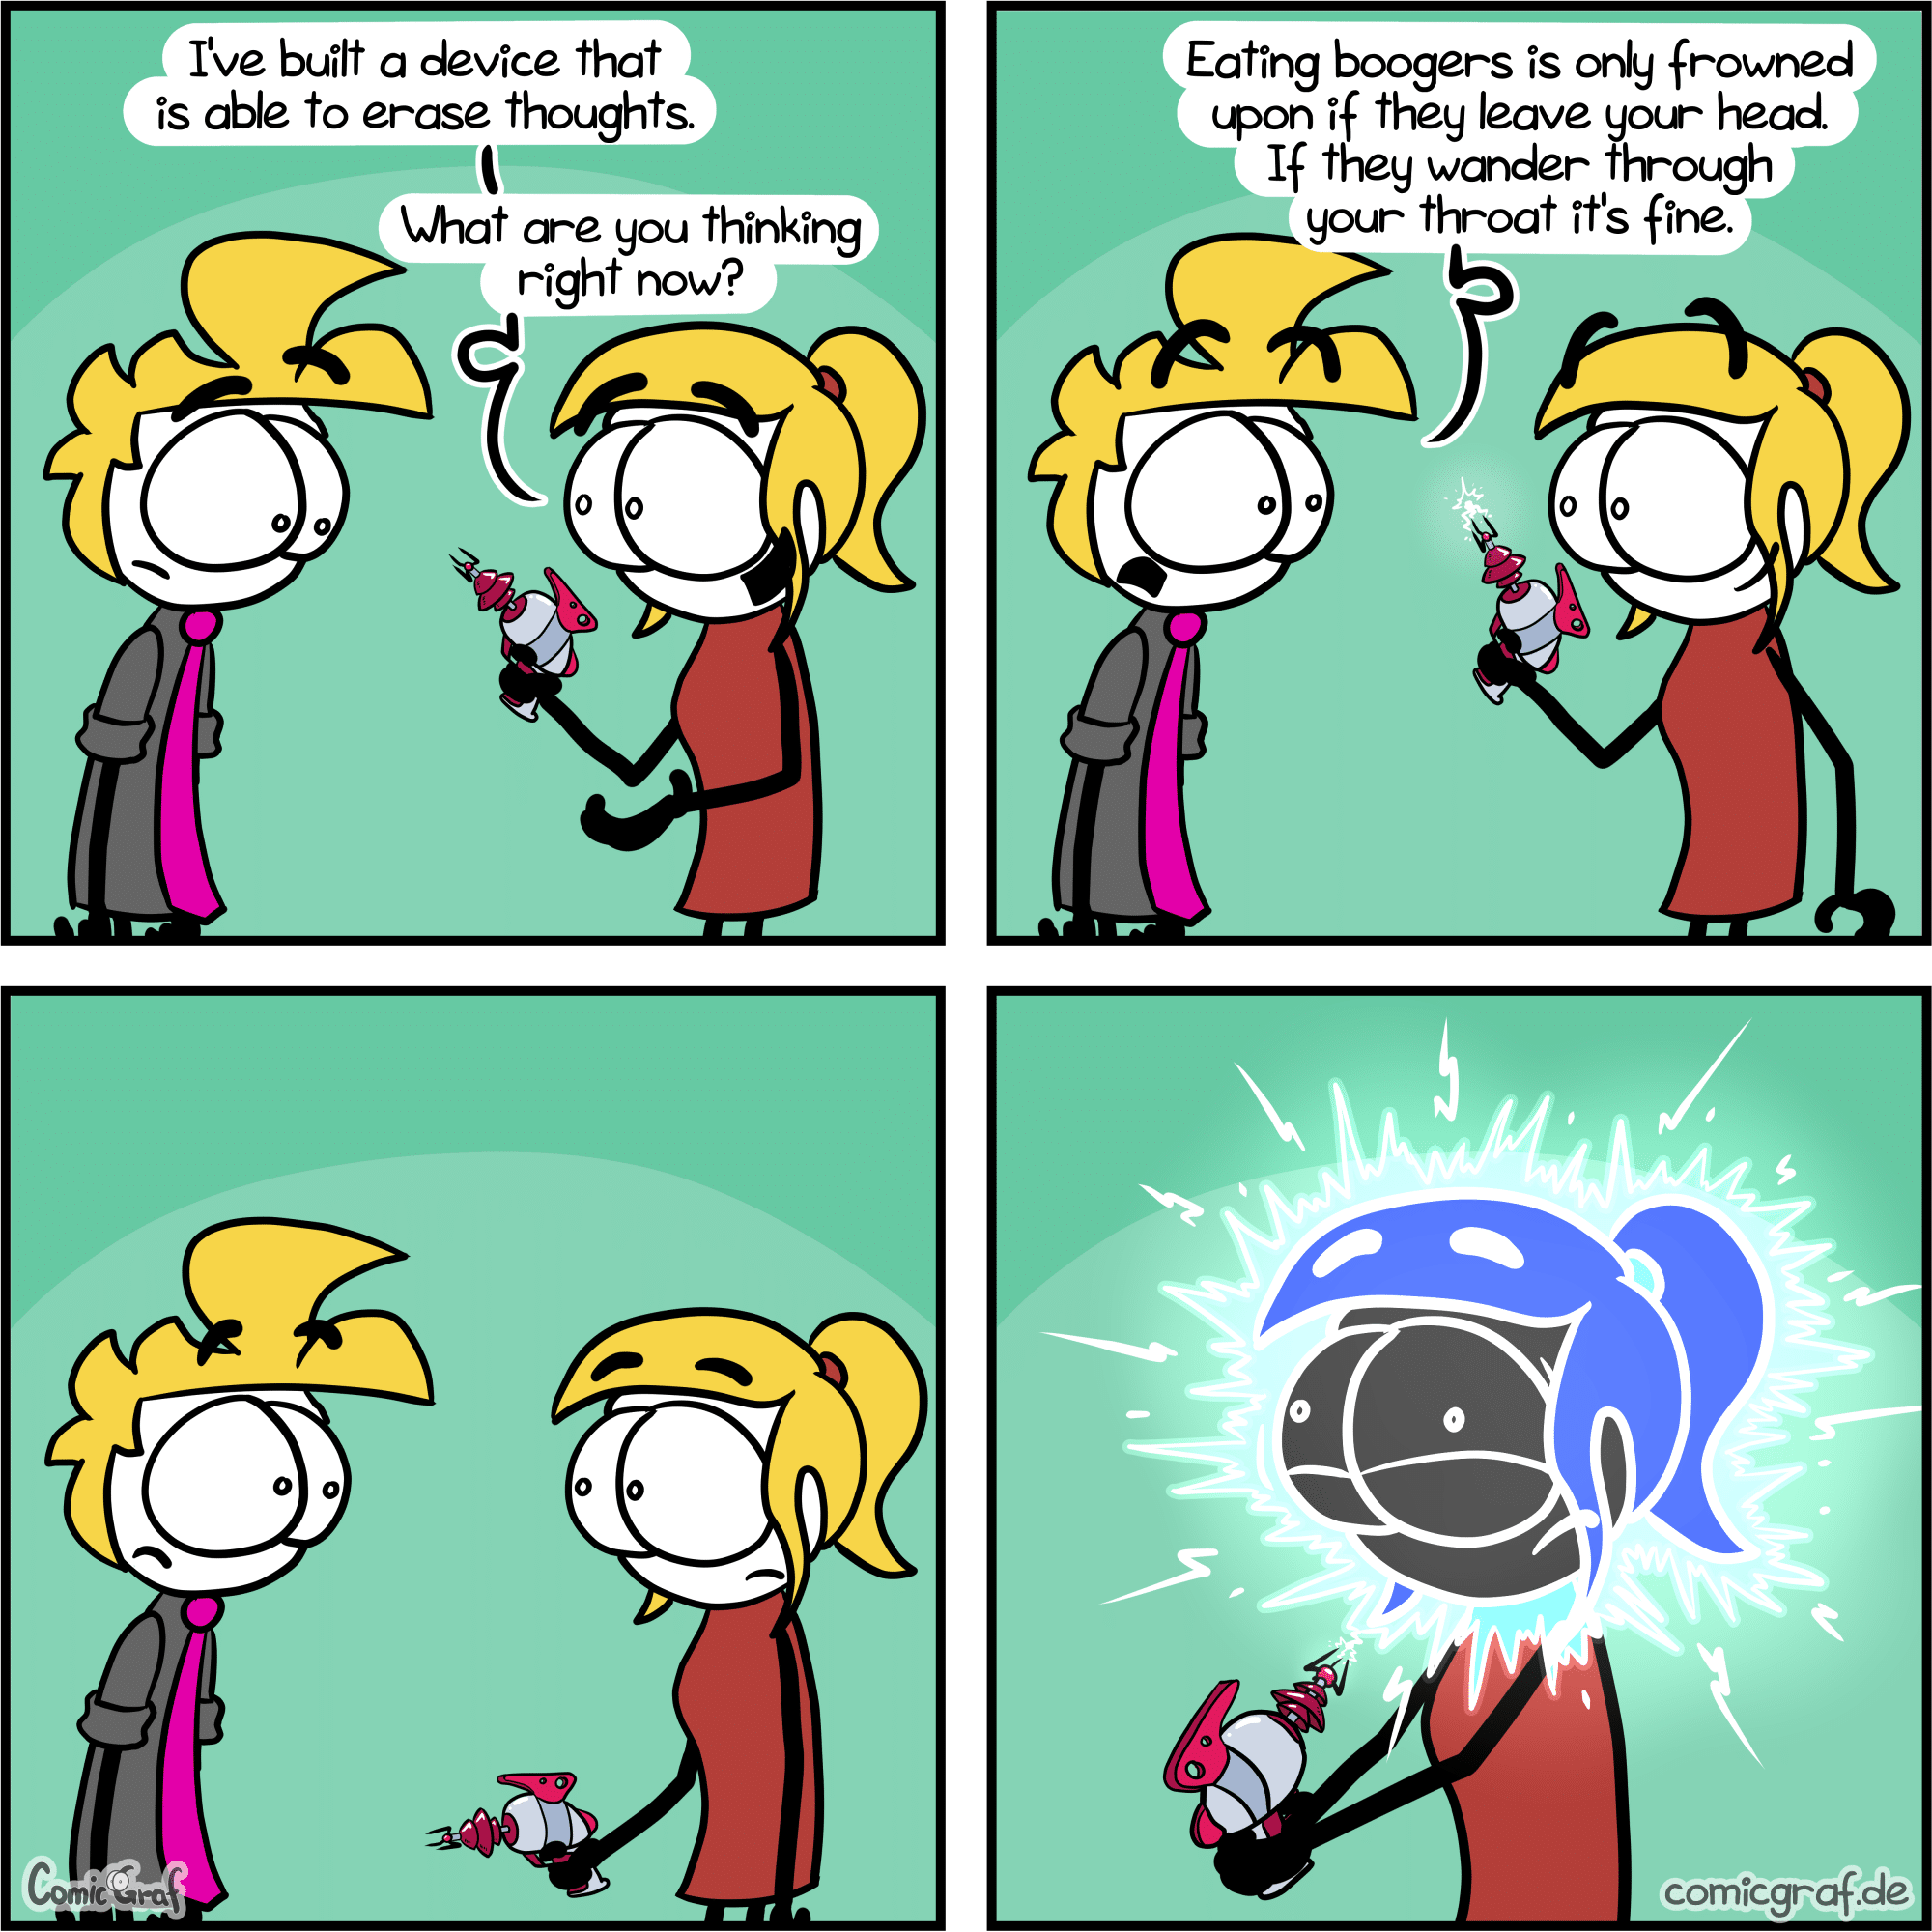 *snorting noises*, Snorting Comics *snorting noises*, Snorting text: I've built a device that able to erase thoughts. right now? Comiccra( Eating boogers is only frowned upon ff they leave your head. If they wander through your throat it's fine. comicgraf.de 